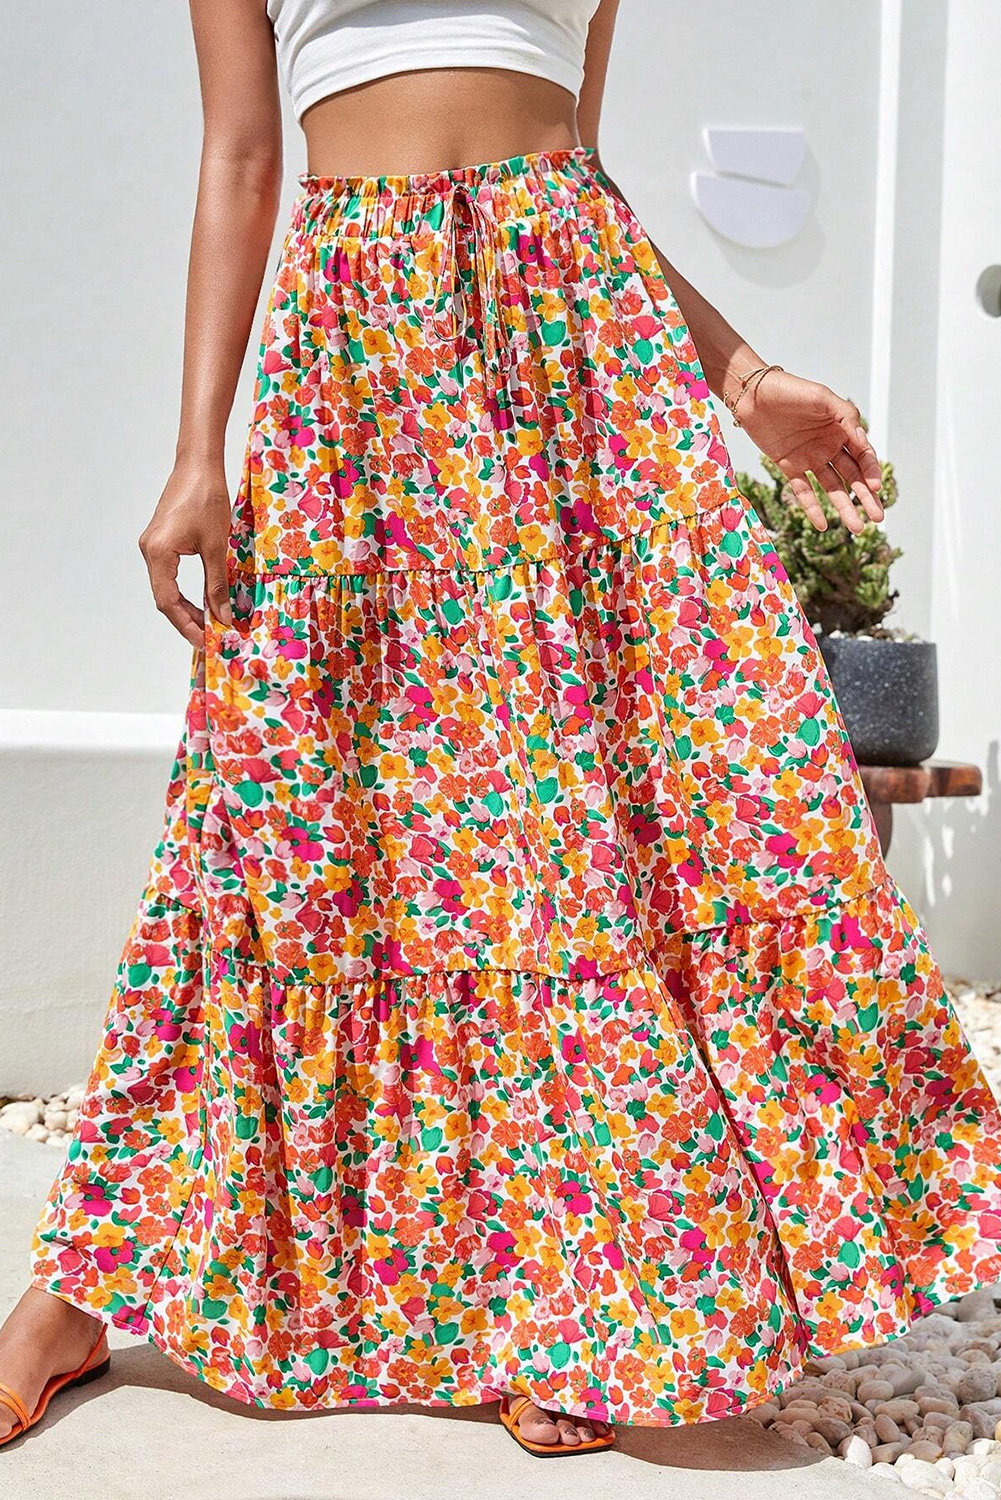 Shewin Wholesale Chic LADY Yellow Boho Floral Print Tiered Maxi Skirt